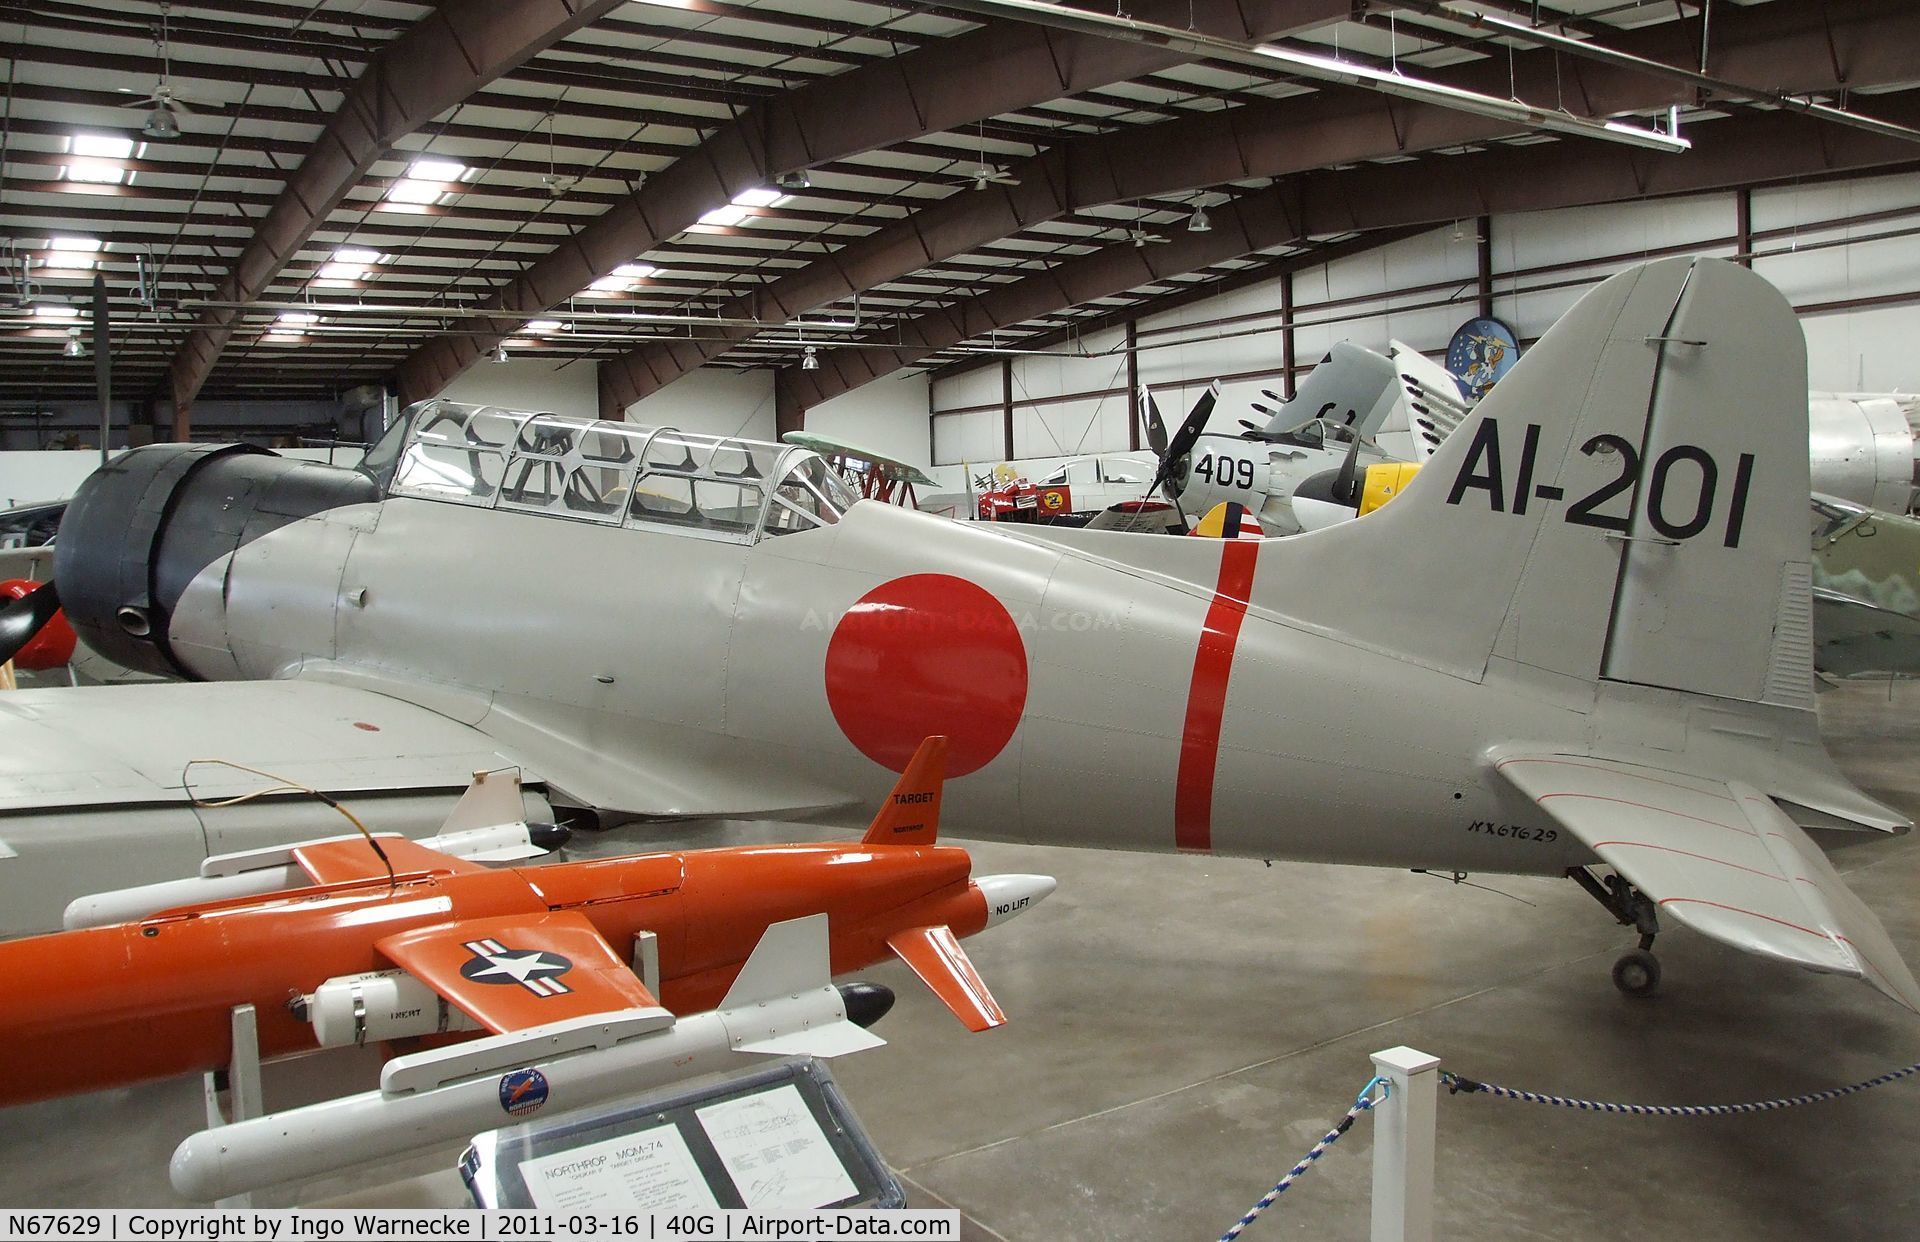 N67629, 1942 Convair BT-15 VAL C/N 11513, Vultee BT-15 (converted to represent a Aichi D3A VAL) at the Planes of Fame Air Museum, Valle AZ